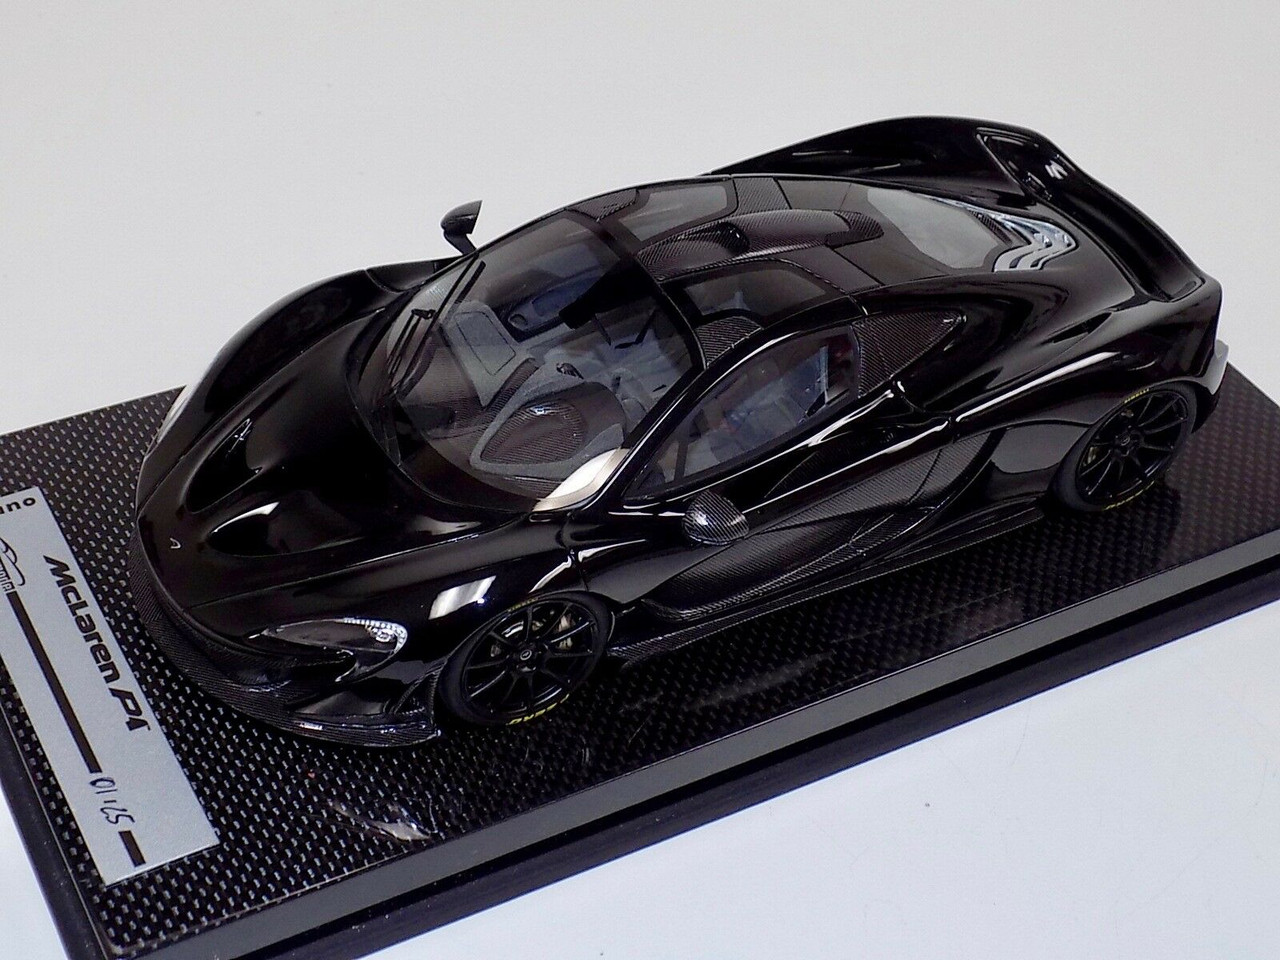 1/18 Tecnomodel McLaren P1 (Gloss Black with Black wheels) with Carbon Base Resin Car Model Limited 01/25